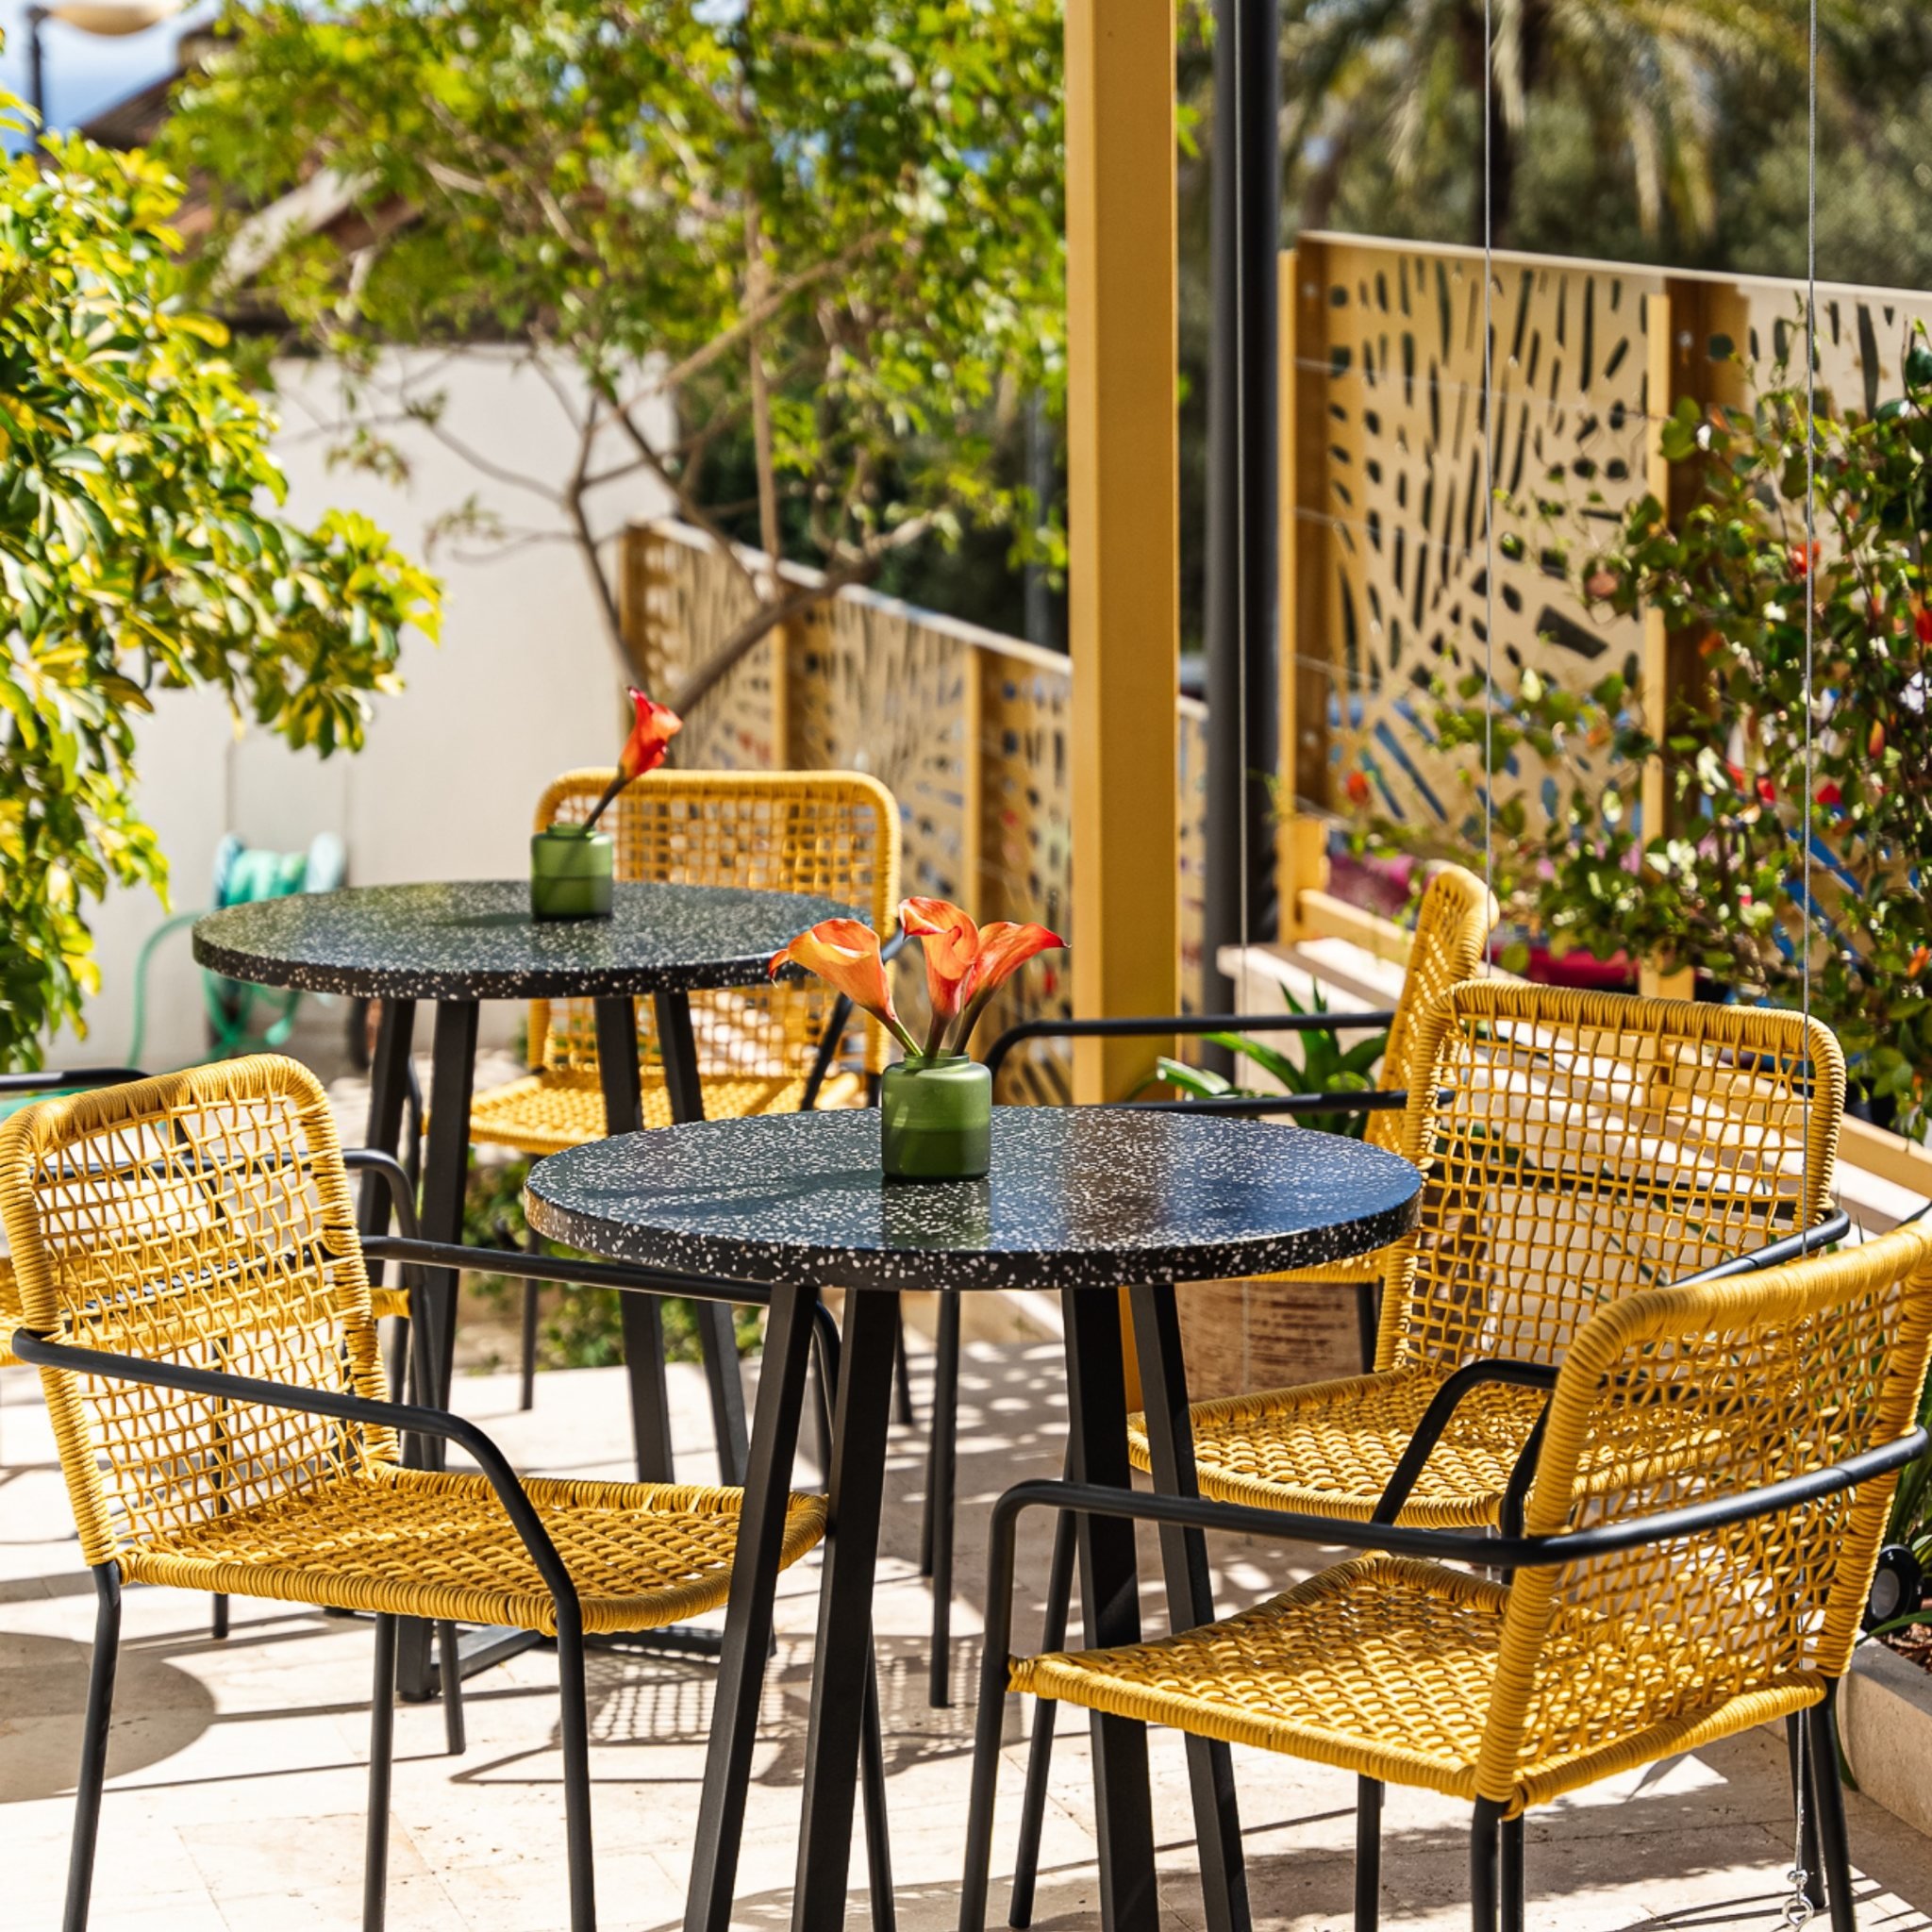 Soak in the gentle mountain breeze on our sunlit terrace, surrounded by the serene beauty of our Mediterranean garden. Savor the afternoon with our gourmet, artisanal treats, crafted sustainably for the ultimate indulgence. #GourmetCafe #ArtisanDelig